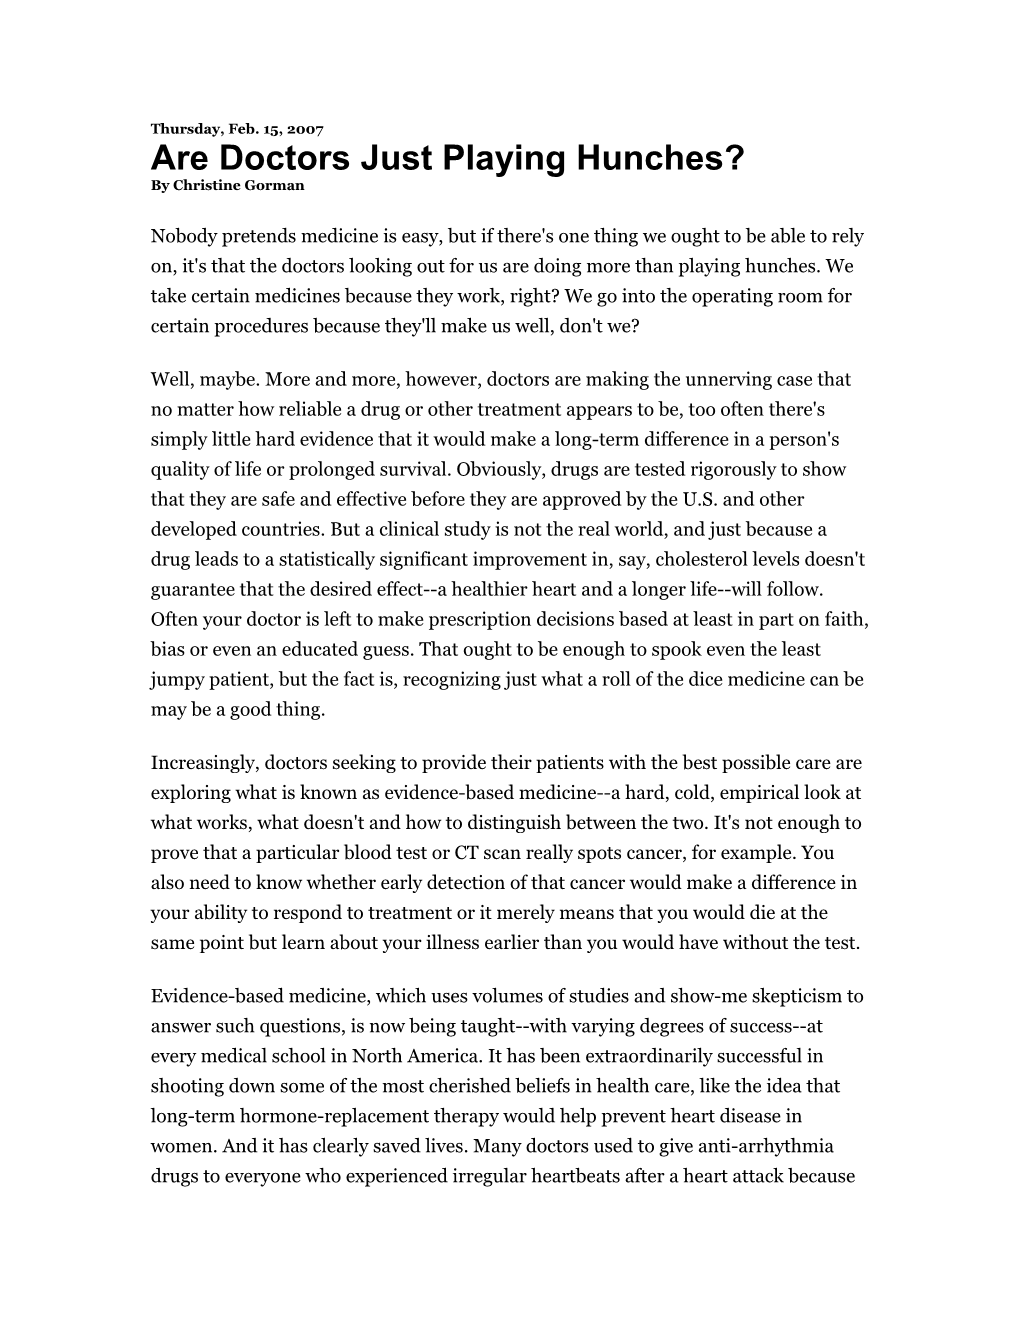 Are Doctors Just Playing Hunches?